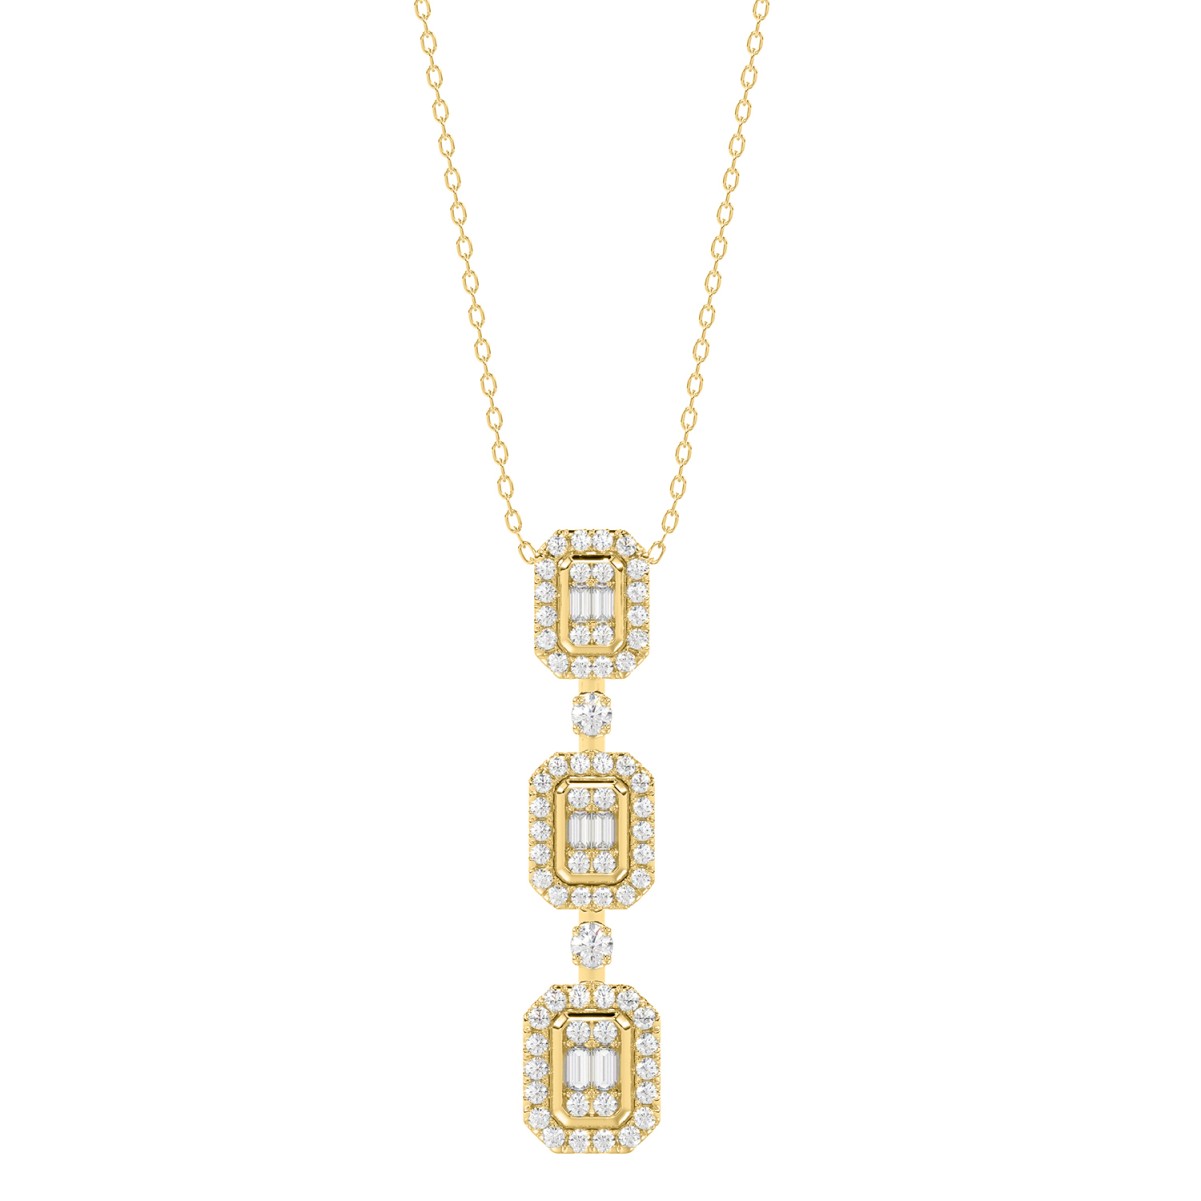 18K YELLOW GOLD 1/2CT ROUND/BAGUETTE DIAMOND LADIES PENDANT WITH CHAIN  